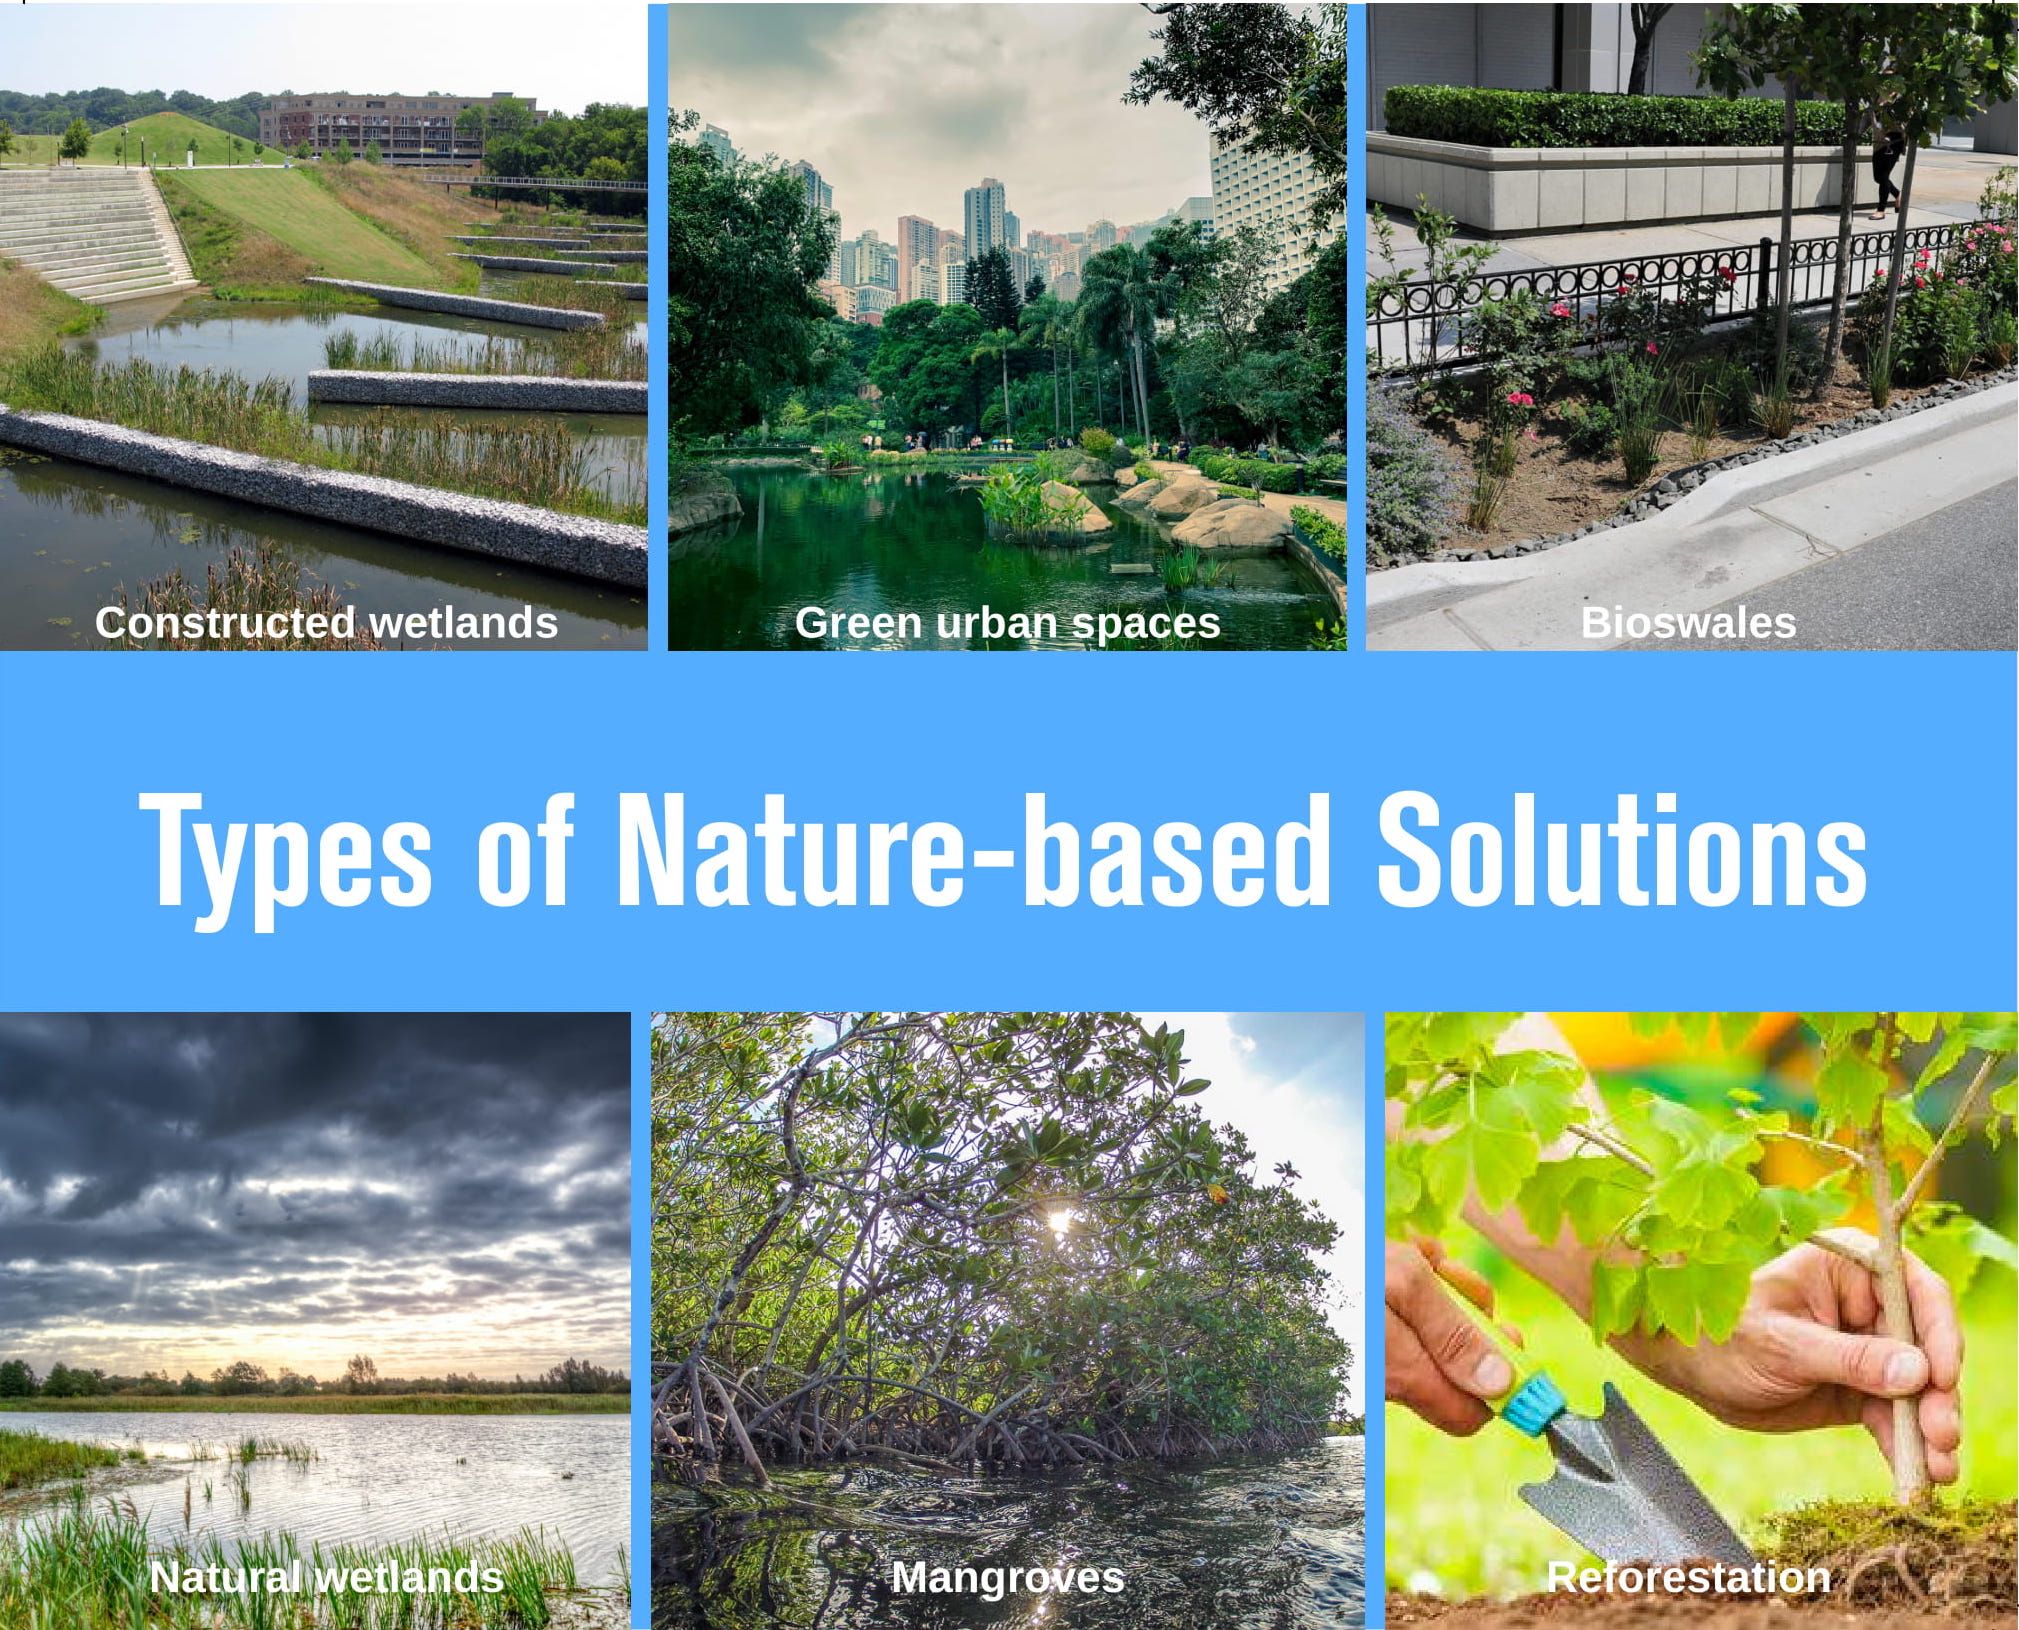 Nature-based Solutions: advantage of being a developing country - International Water Association